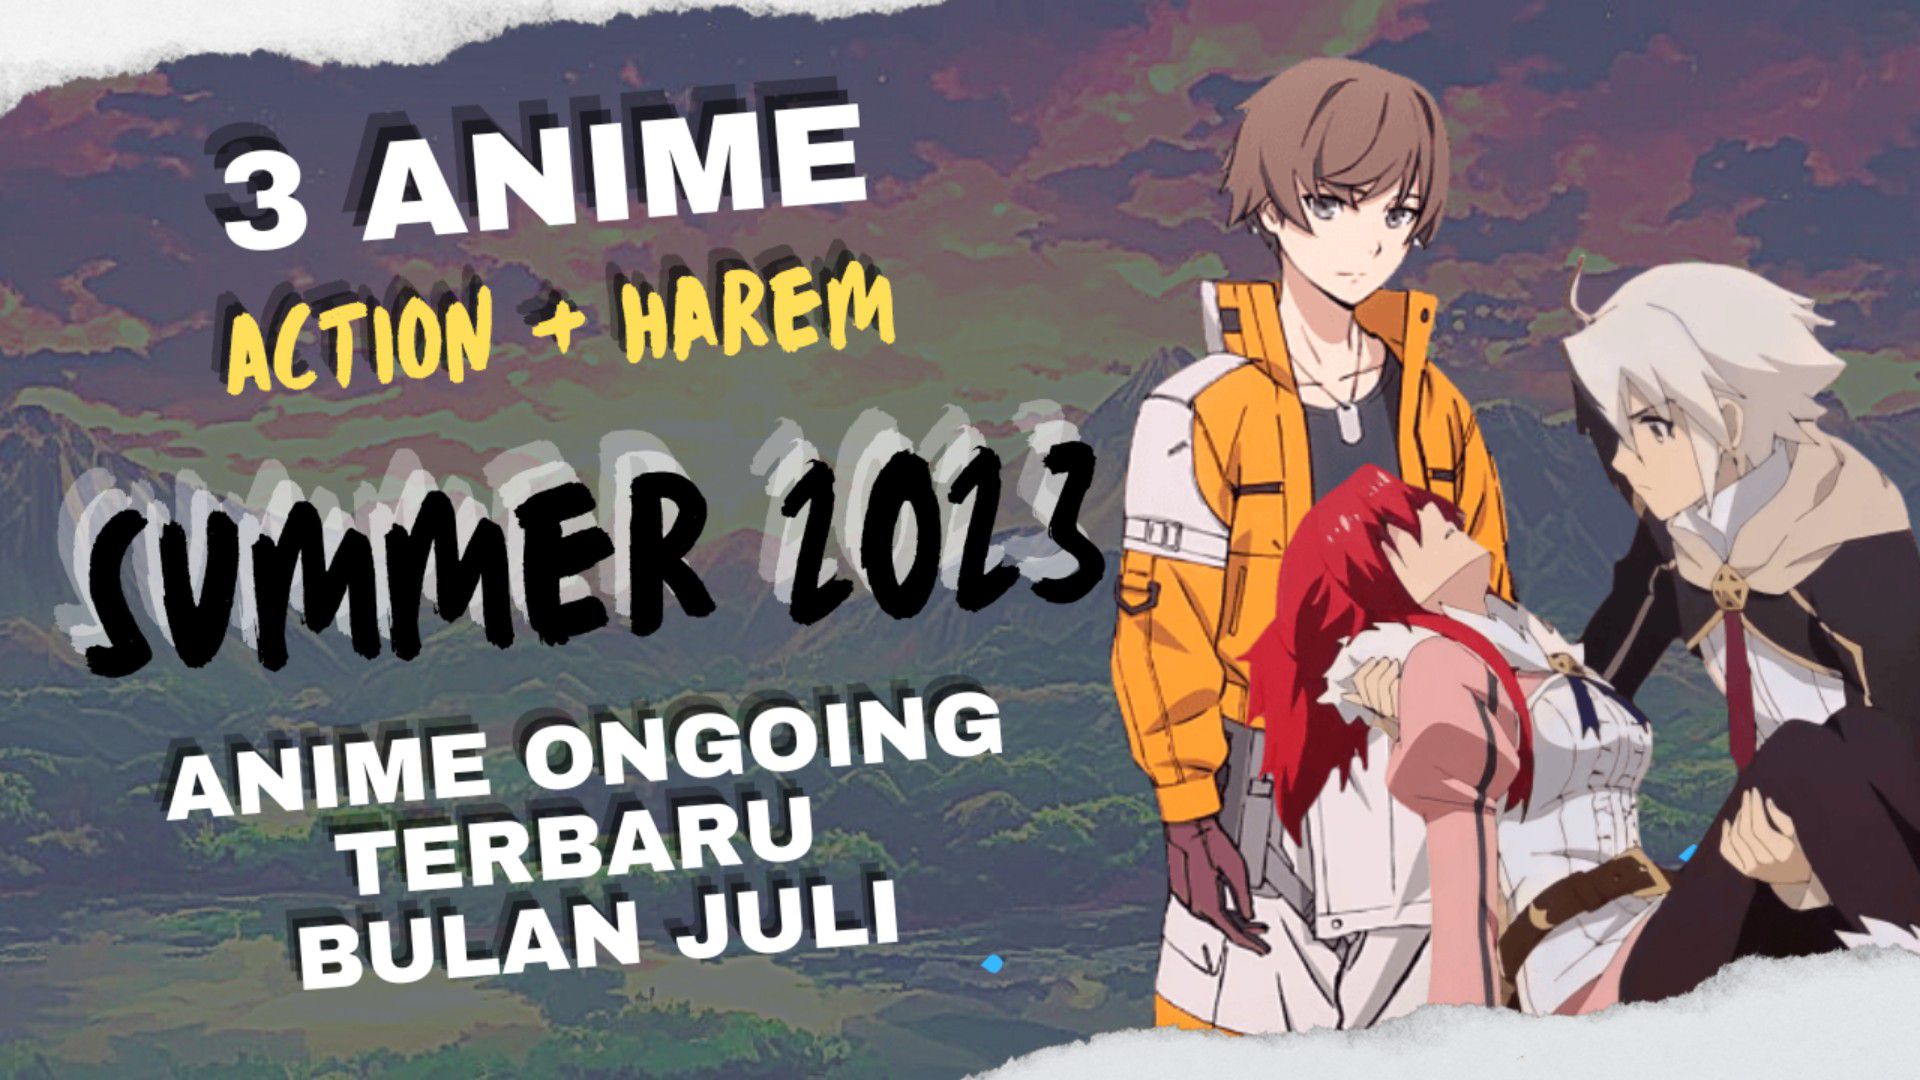 Best Anime 2020 That Are Coming Soon to a Screen Near You